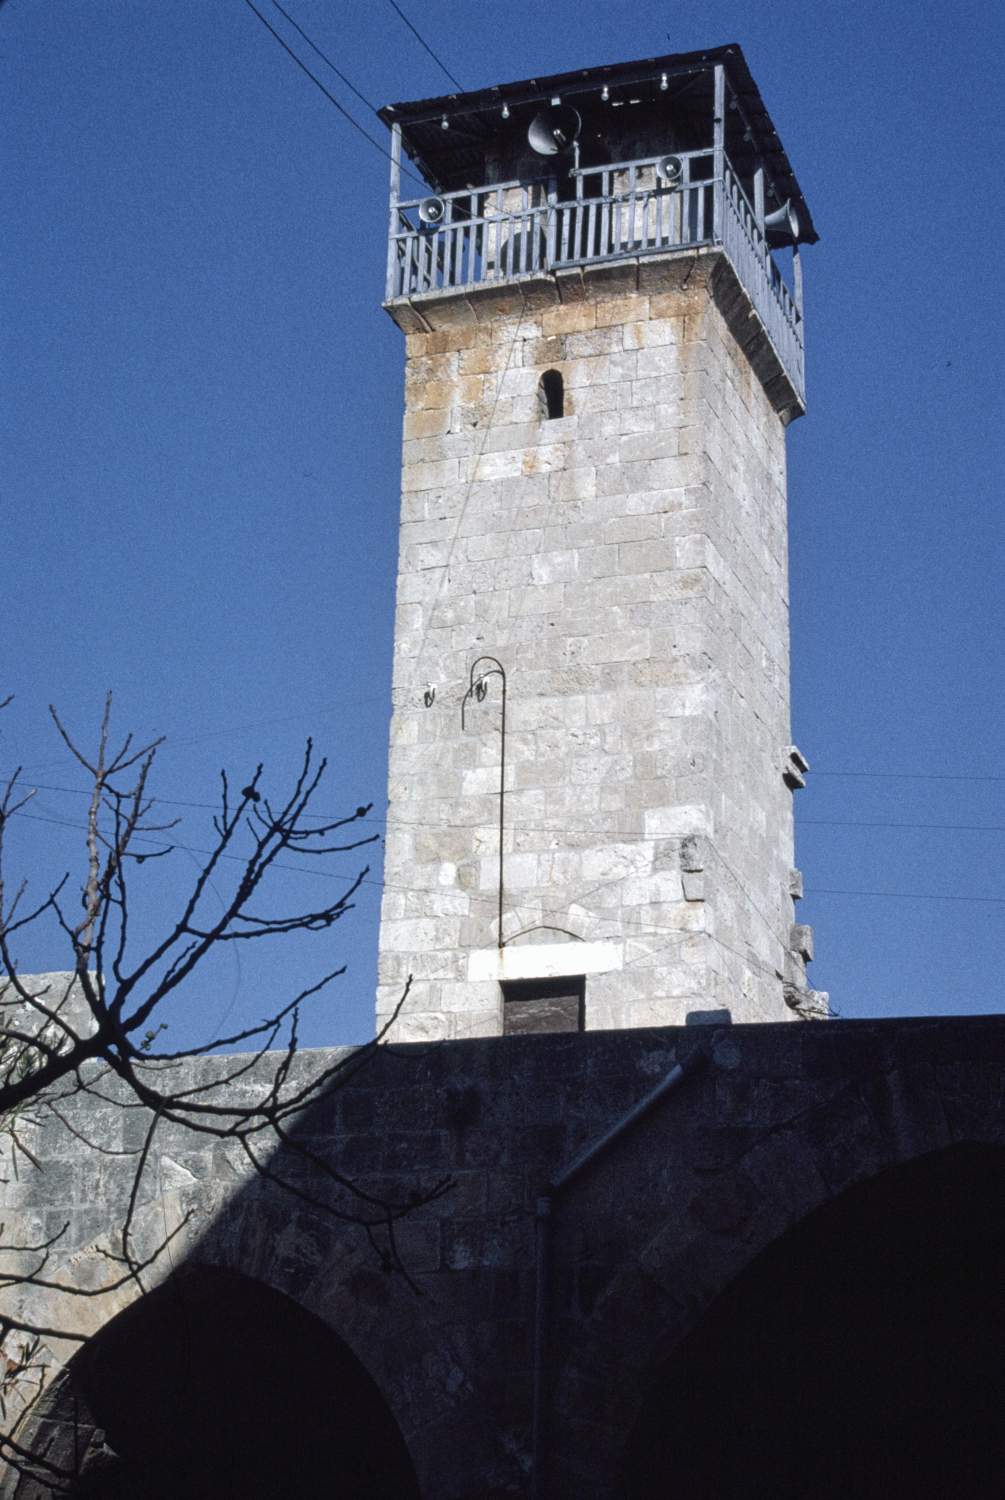 View of minaret from within courtyard.